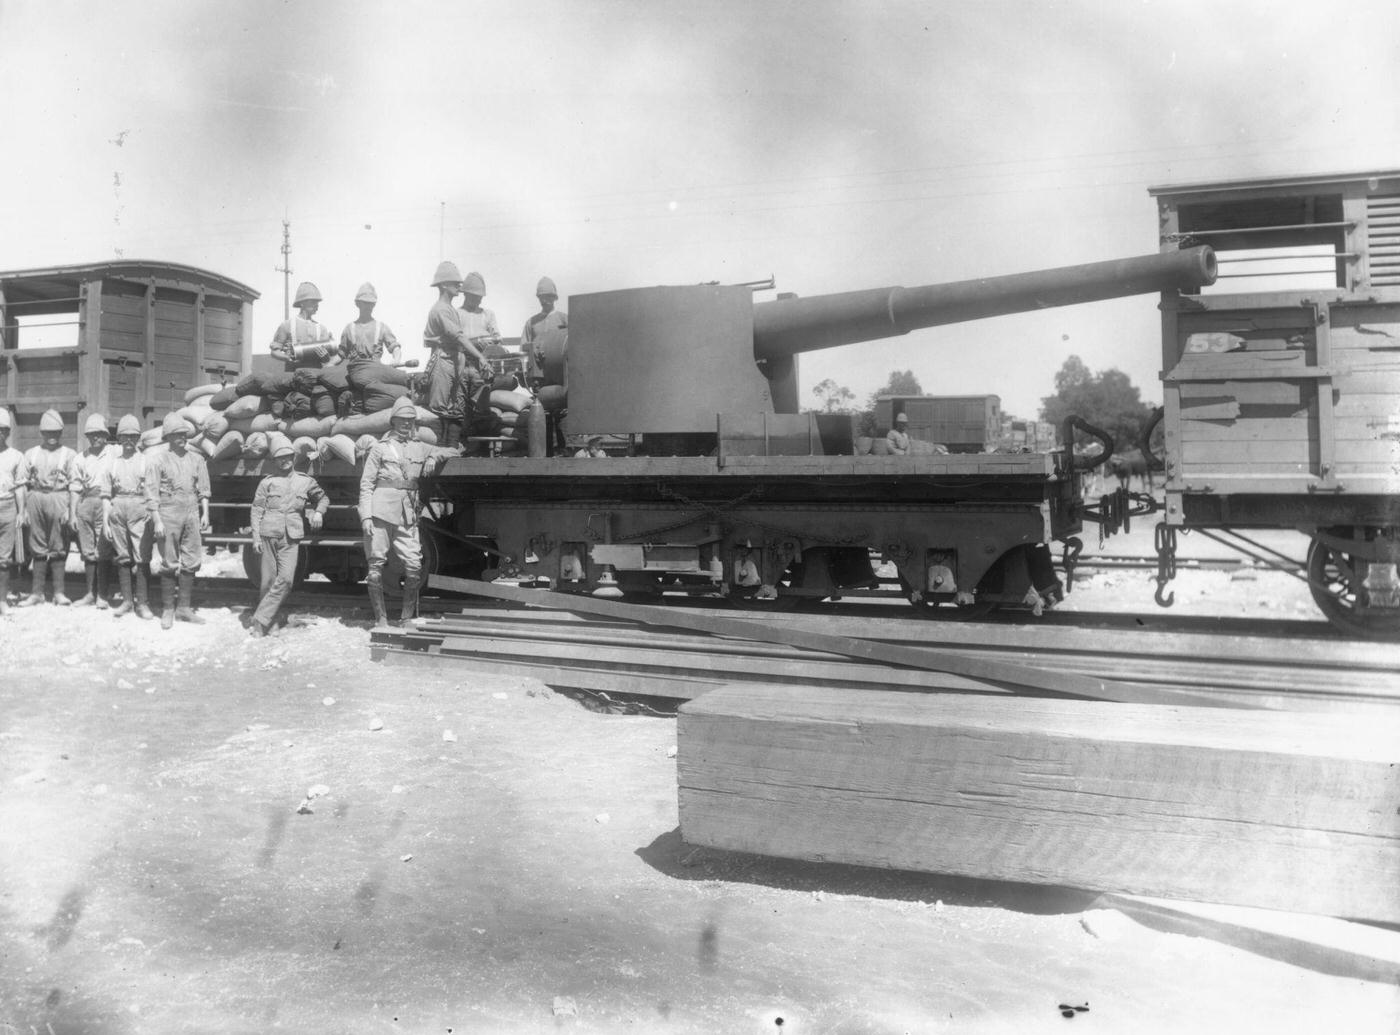 British six-inch naval gun mounted on a railway truck for transportation to Modder River Station, 1900.